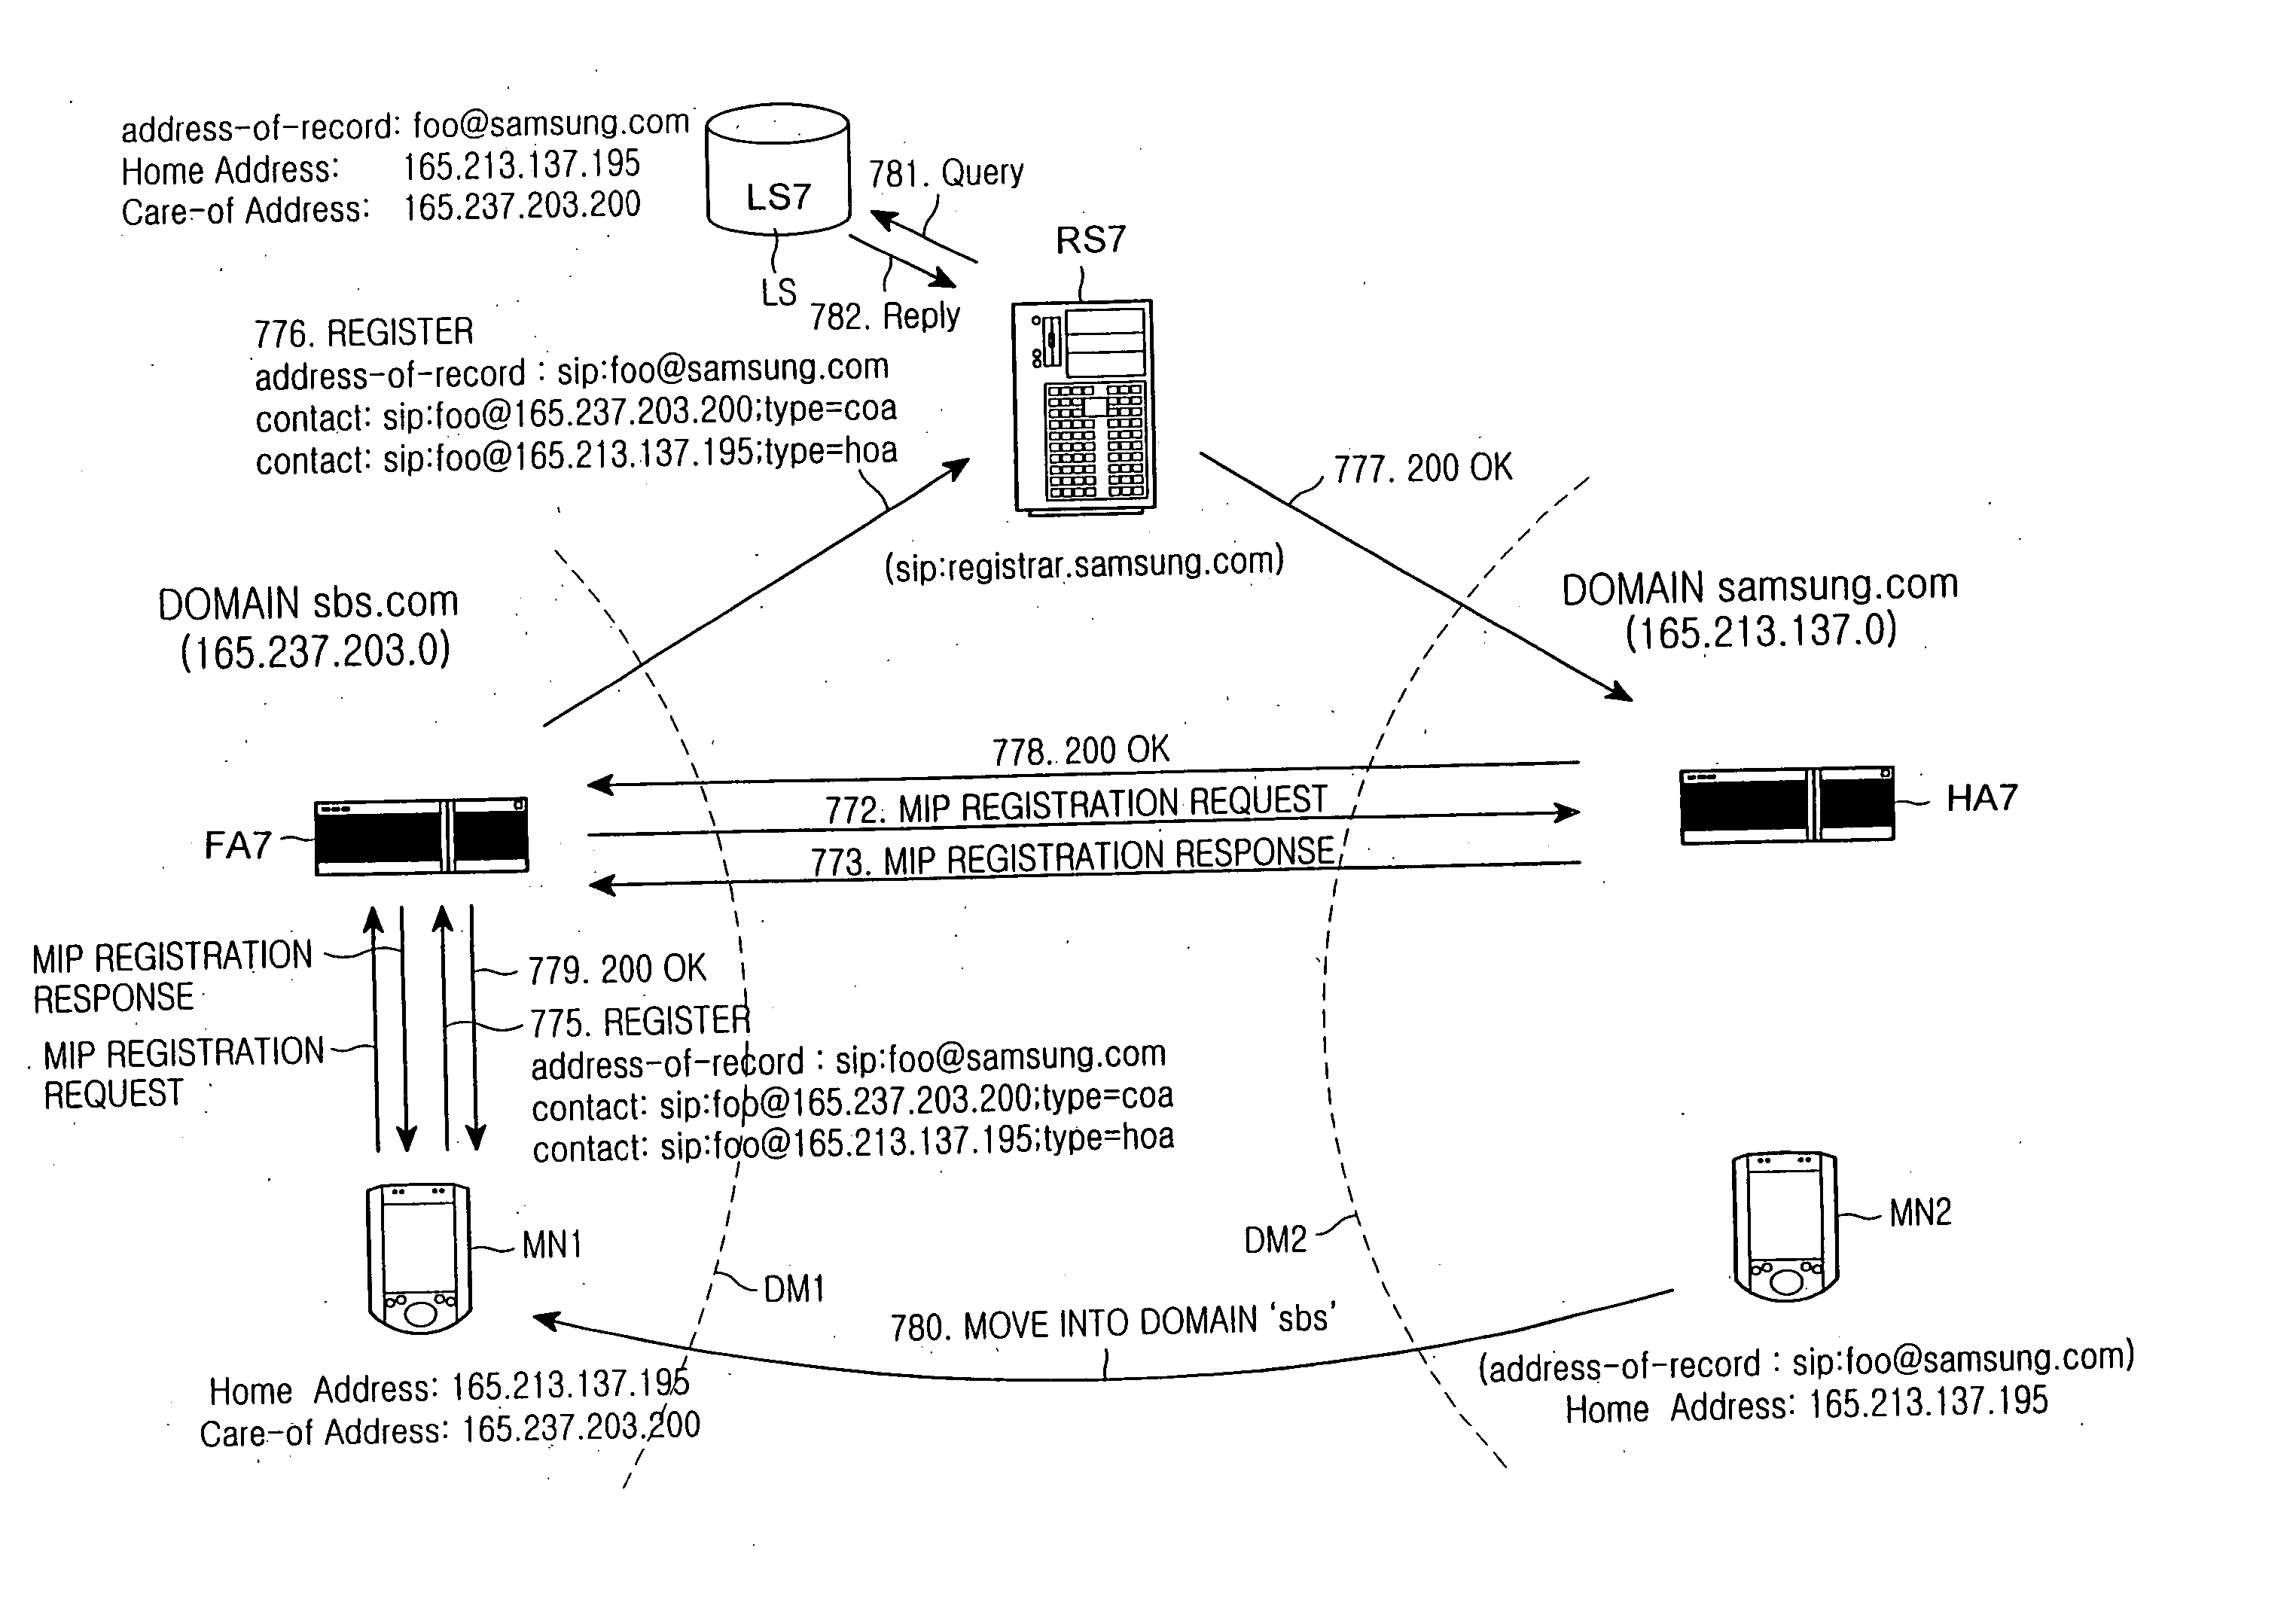 Mobile terminal, session initiation protocol server, and method of controlling routing path for voice-over-internet protocol service, based on mobile internet protocol, voice-over-internet protocol, and session initiation protocol